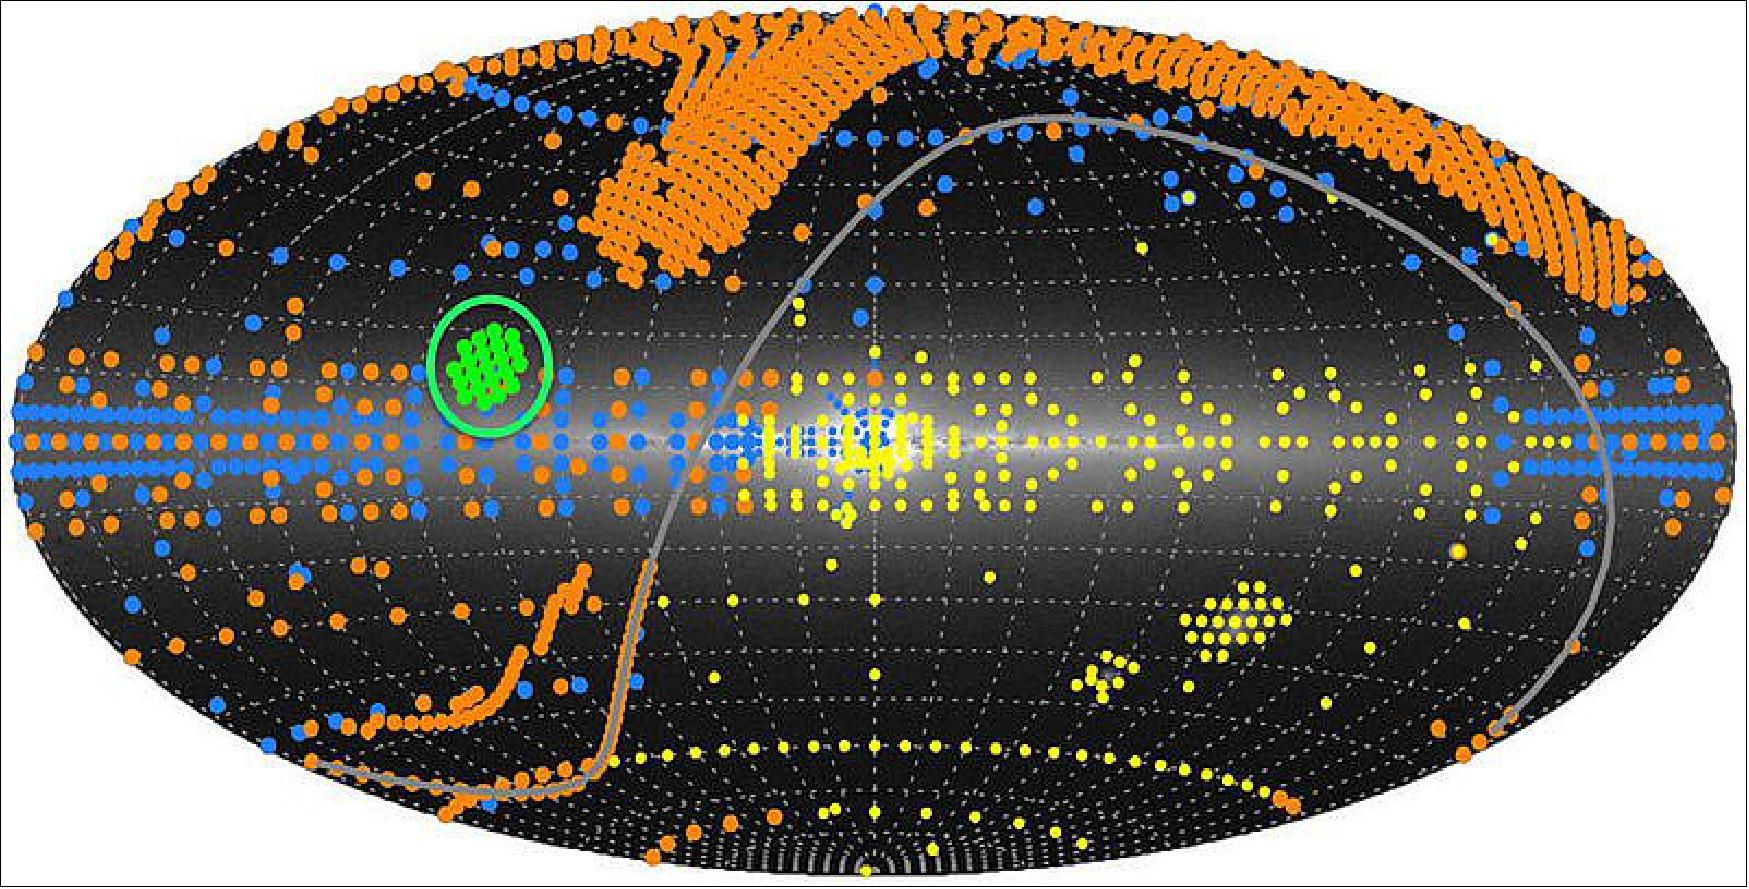 Figure 4: The planned APOGEE-2 survey area overlain on an image of the Milky Way. Each dot shows a position where APOGEE-2 will obtain stellar spectra (image credit: Sloan Digital Sky Survey)